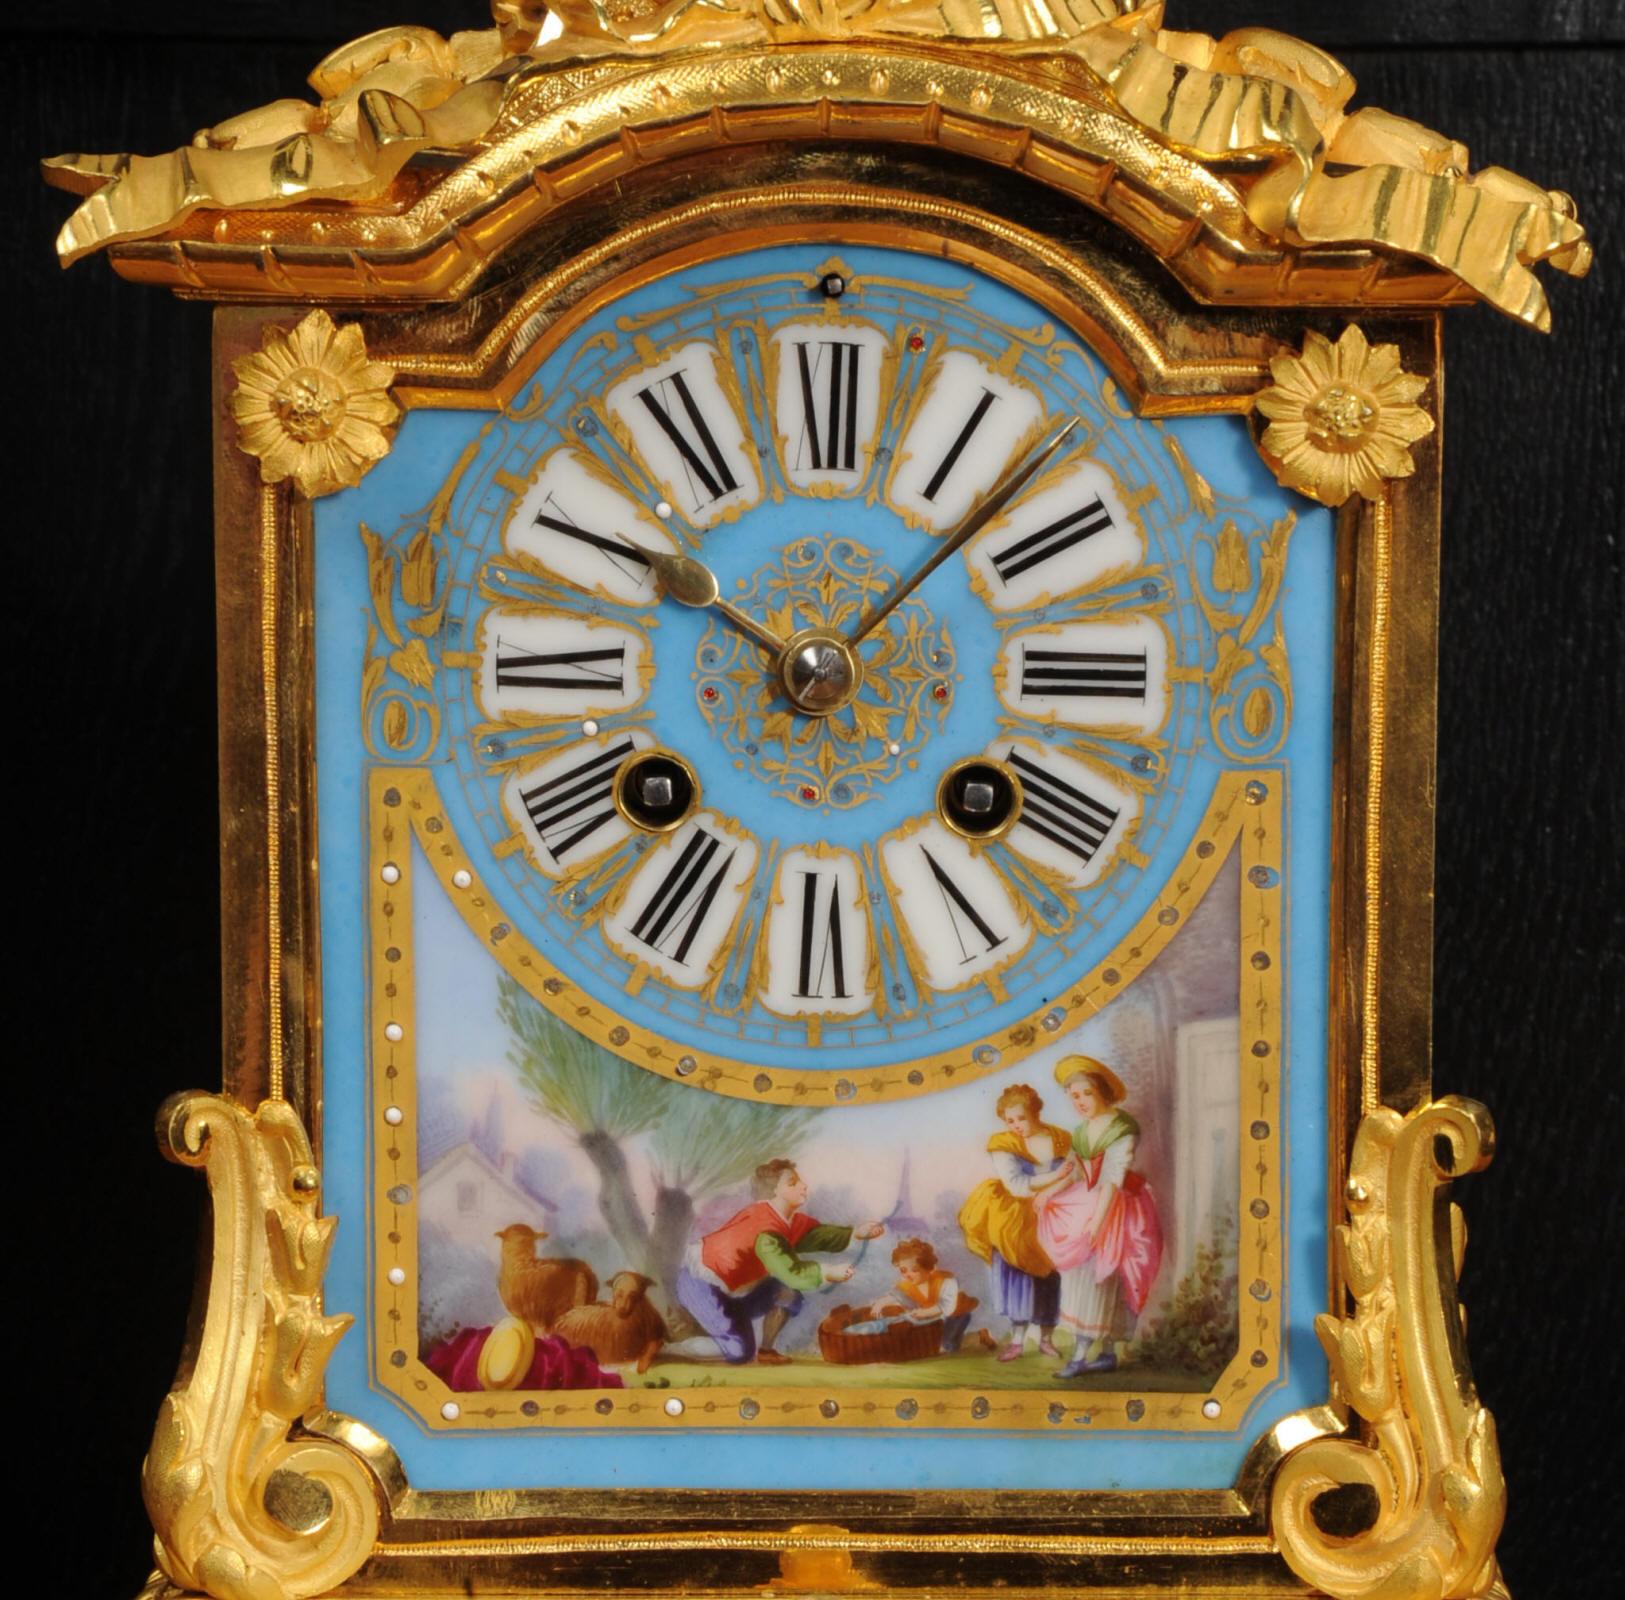 19th Century Antique French Sevres Porcelain and Ormolu Clock